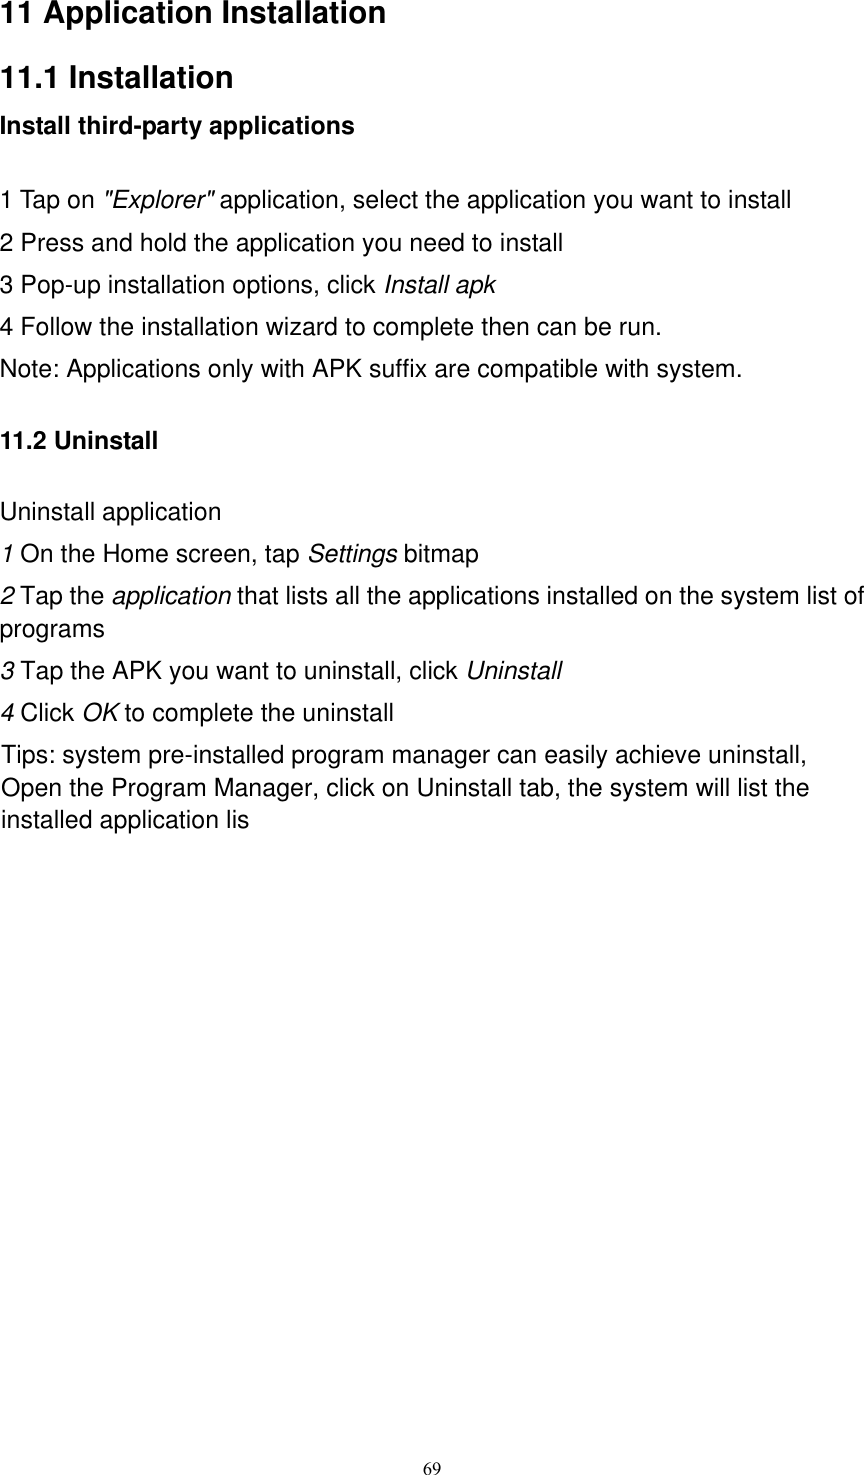      69 11 Application Installation 11.1 Installation Install third-party applications              1 Tap on &quot;Explorer&quot; application, select the application you want to install 2 Press and hold the application you need to install 3 Pop-up installation options, click Install apk 4 Follow the installation wizard to complete then can be run. Note: Applications only with APK suffix are compatible with system. 11.2 Uninstall Uninstall application 1 On the Home screen, tap Settings bitmap 2 Tap the application that lists all the applications installed on the system list of programs 3 Tap the APK you want to uninstall, click Uninstall 4 Click OK to complete the uninstall Tips: system pre-installed program manager can easily achieve uninstall, Open the Program Manager, click on Uninstall tab, the system will list the installed application lis           